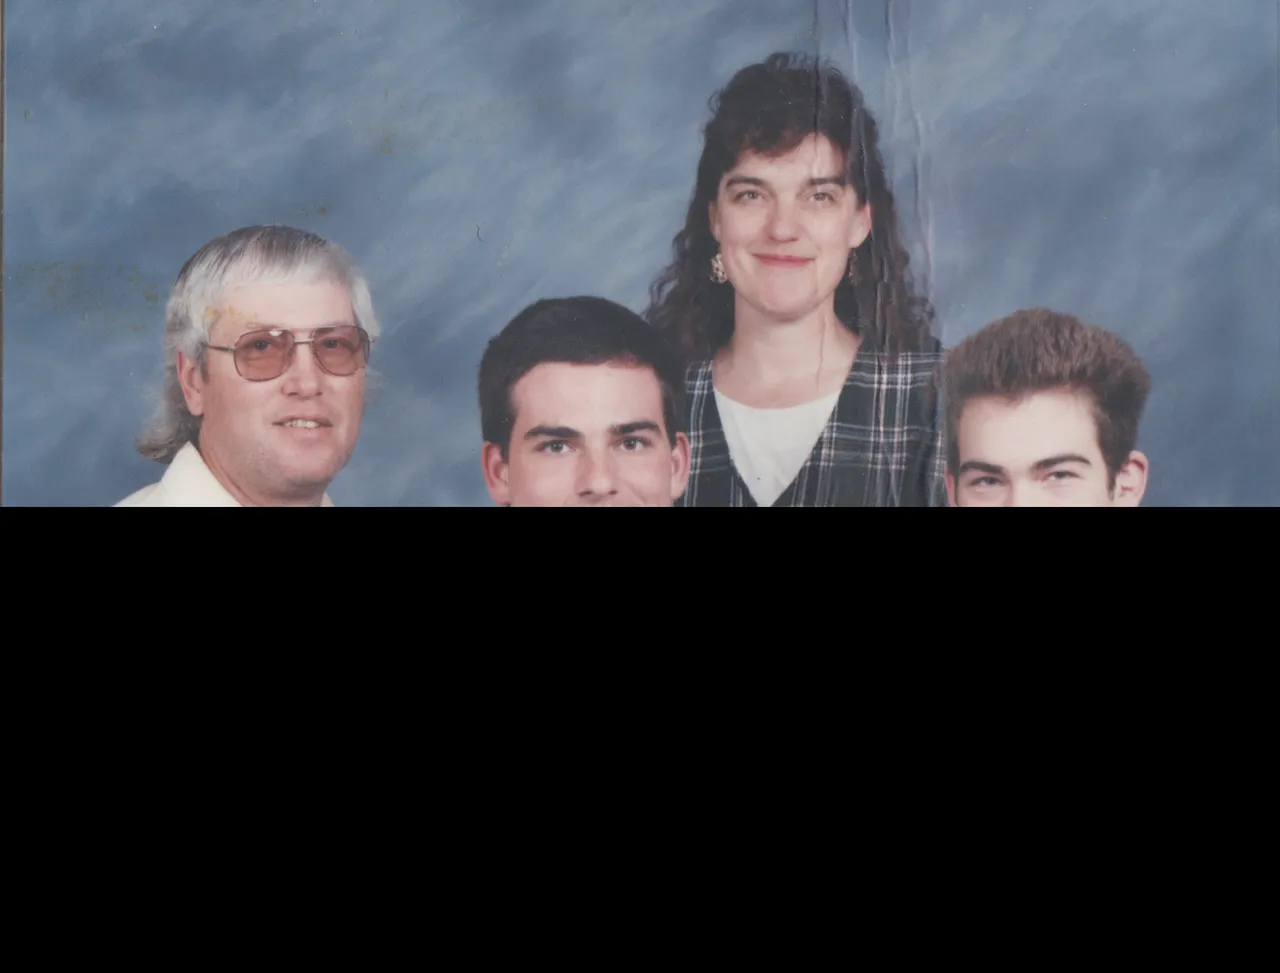 1996-12-25 - Williams Family for Christmas, not sure what month, it says 96, Jim Karen, Nathan, Alan.png